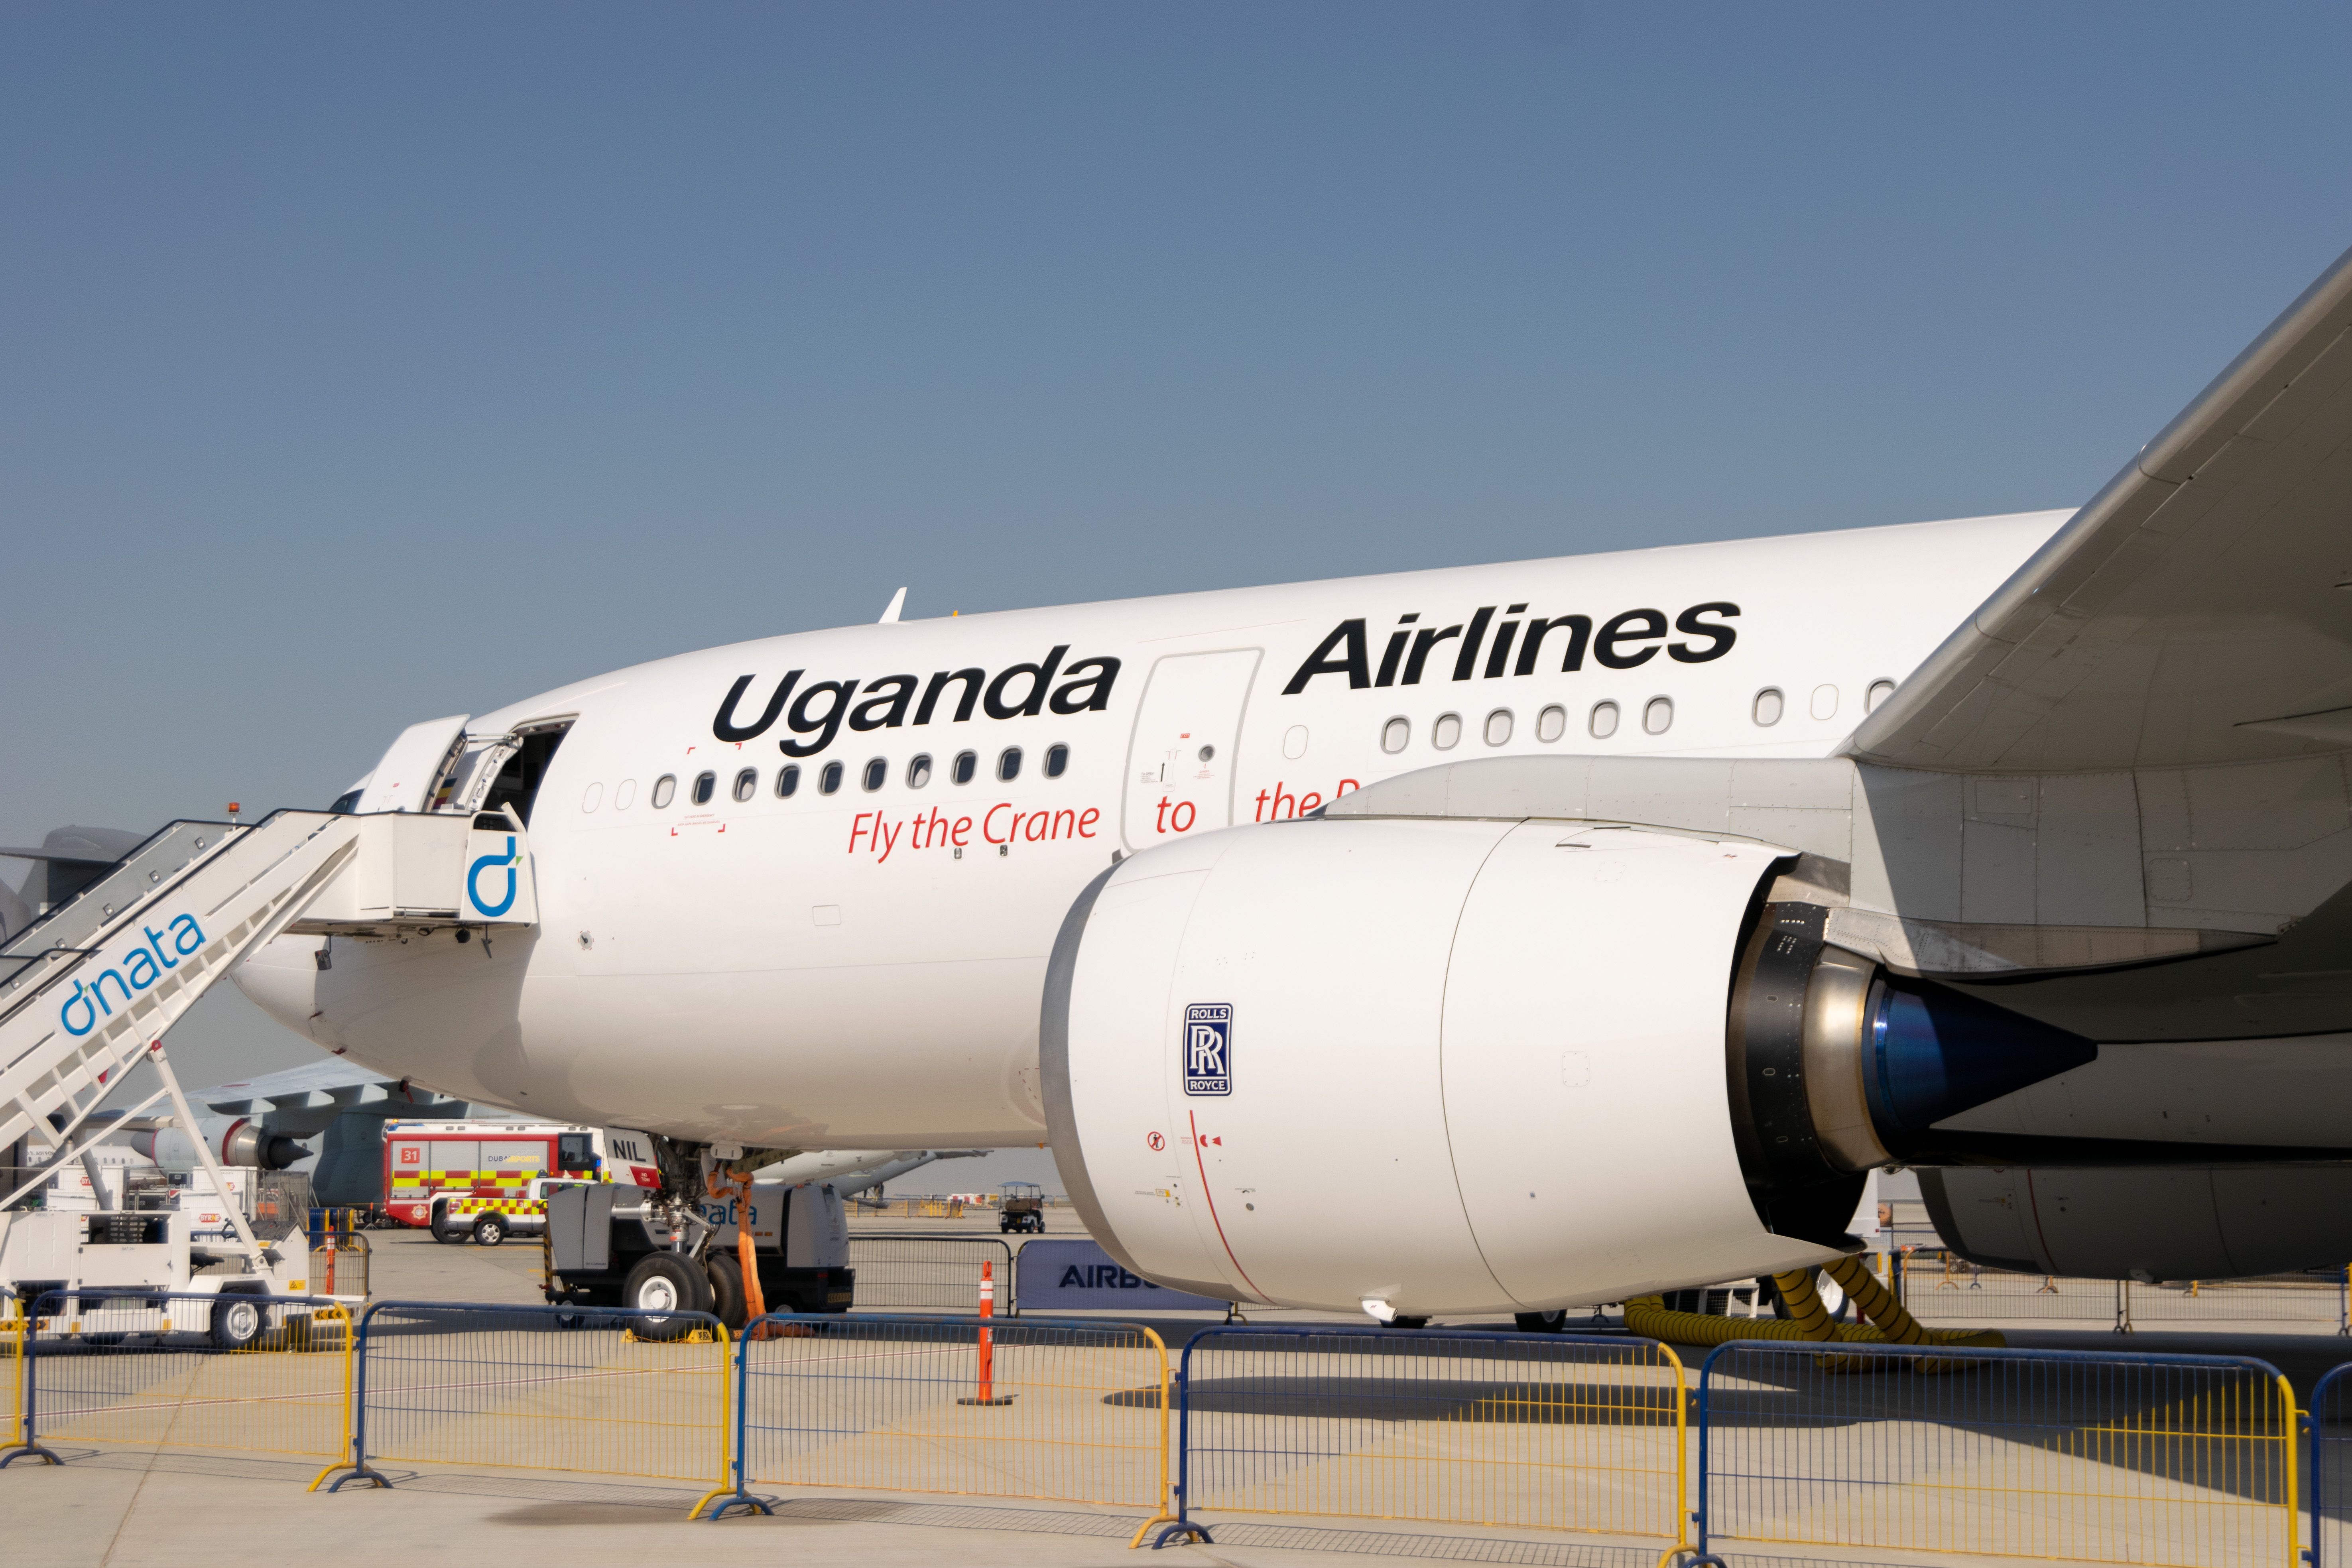 A Uganda Airlines aircraft parked at the airport.